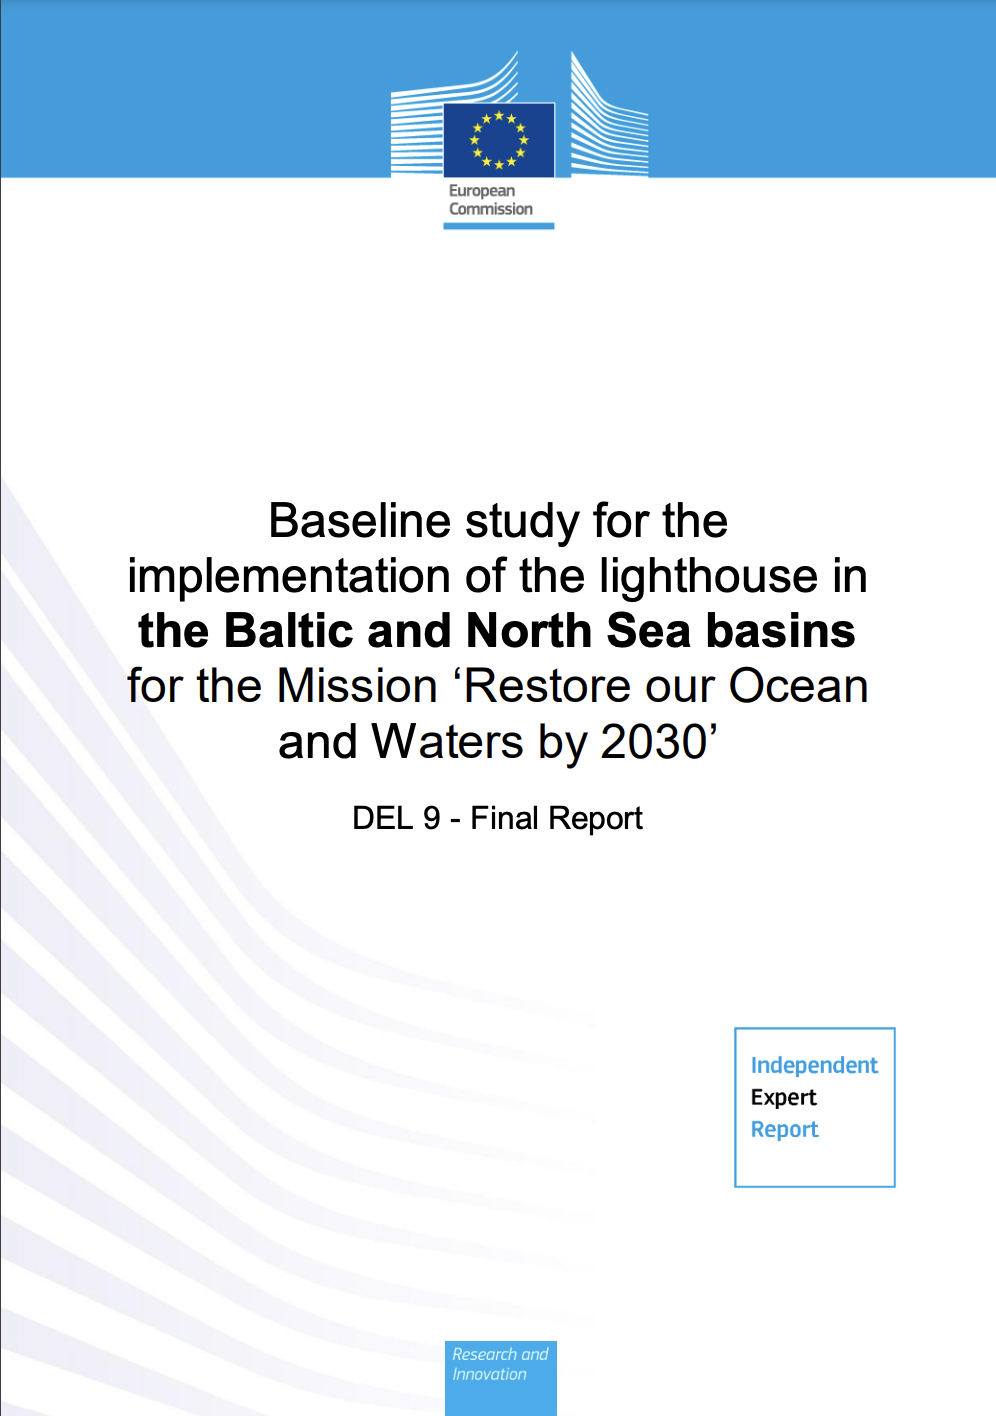 Baseline study for the implementation of the lighthouse in the Baltic and North Sea basins for the Mission ‘Restore our ocean and waters by 2030’